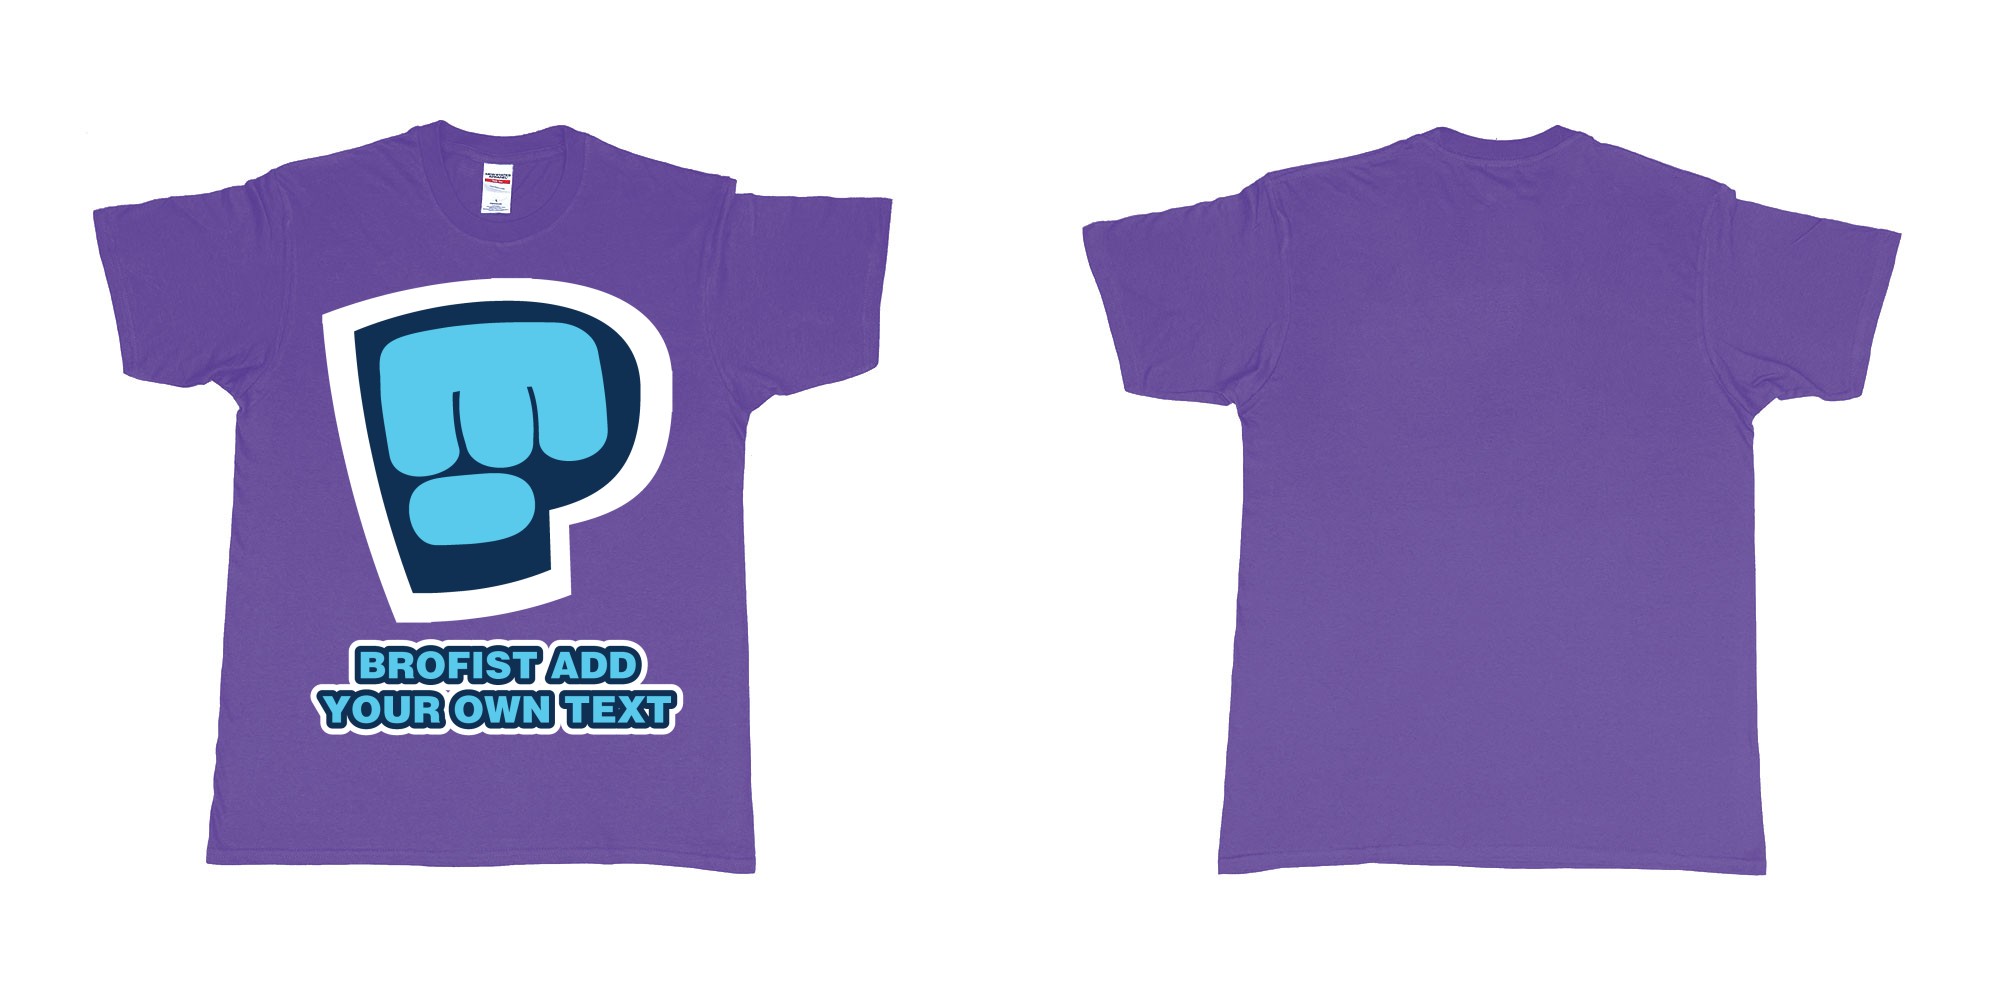 Custom tshirt design pewdiepie brofist in fabric color purple choice your own text made in Bali by The Pirate Way